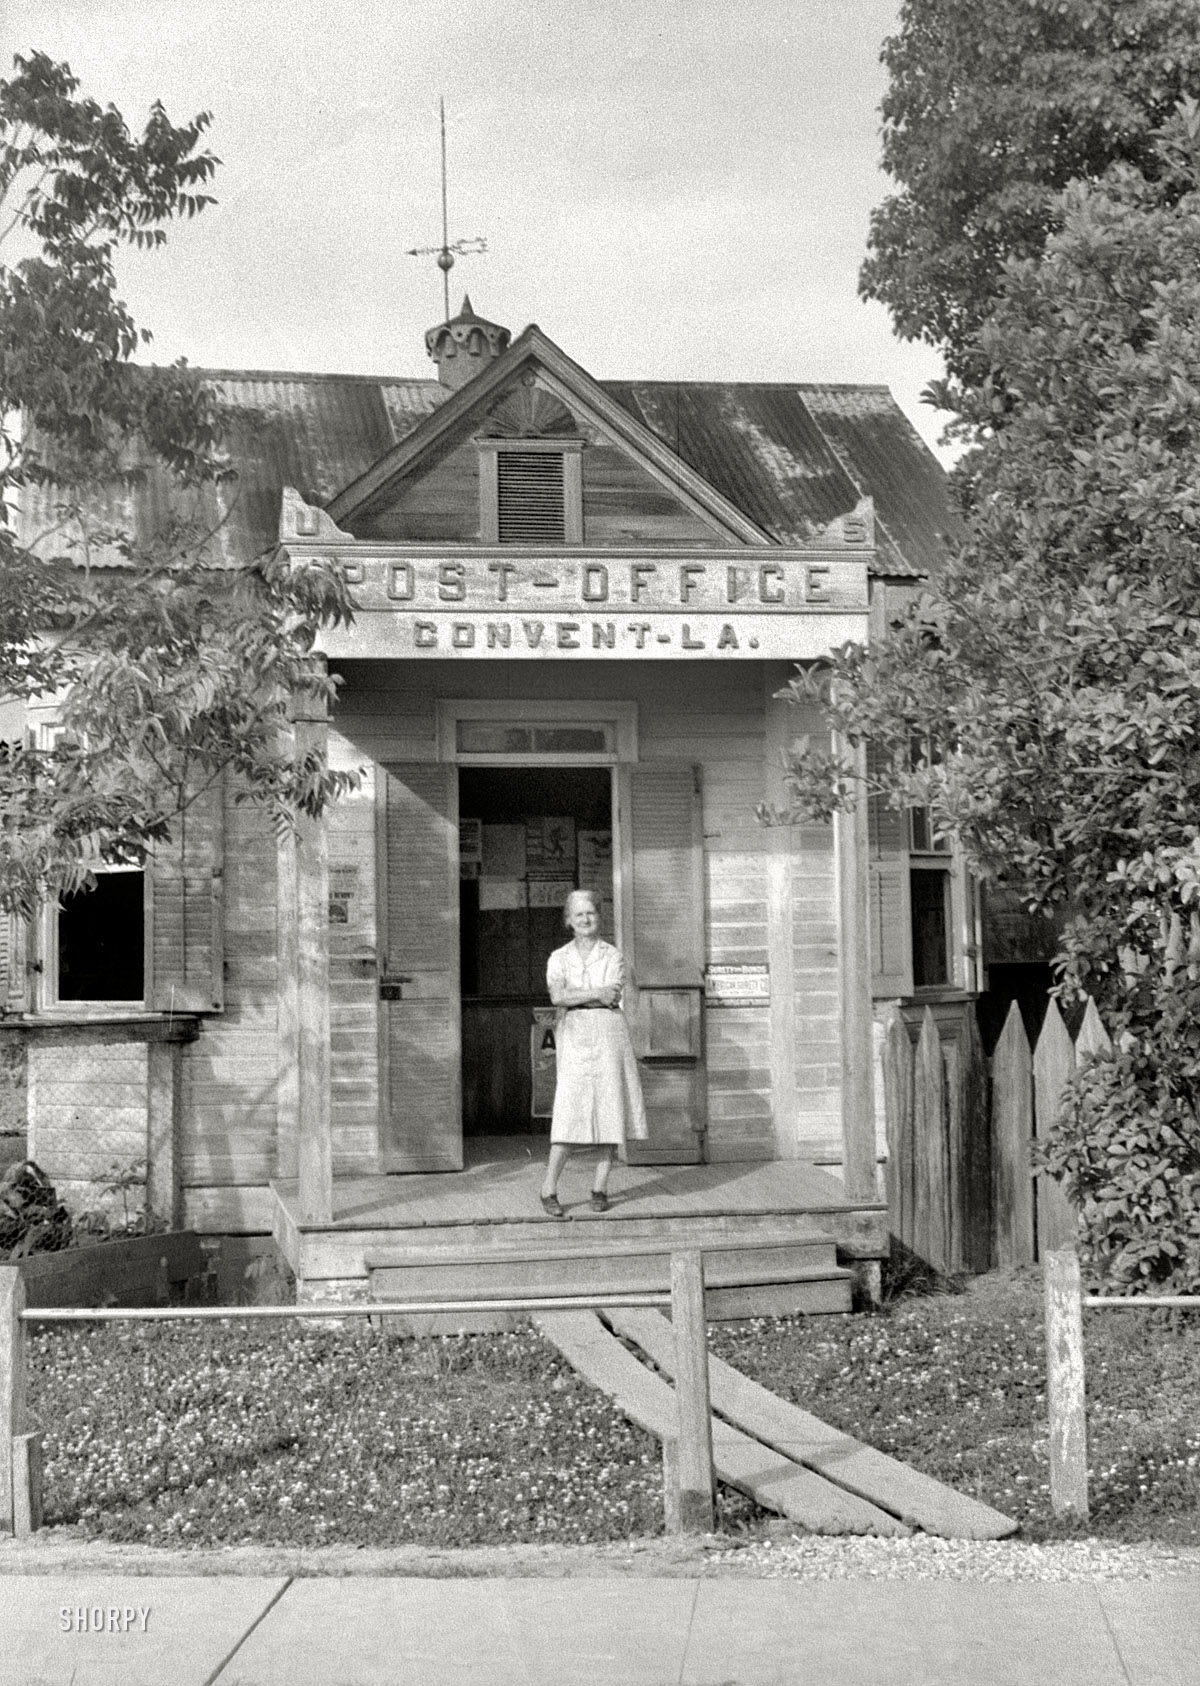 Circa 1939. "Post Office in Convent, Louisiana." 35mm nitrate negative by John Vachon for the Farm Security Administration. View full size.